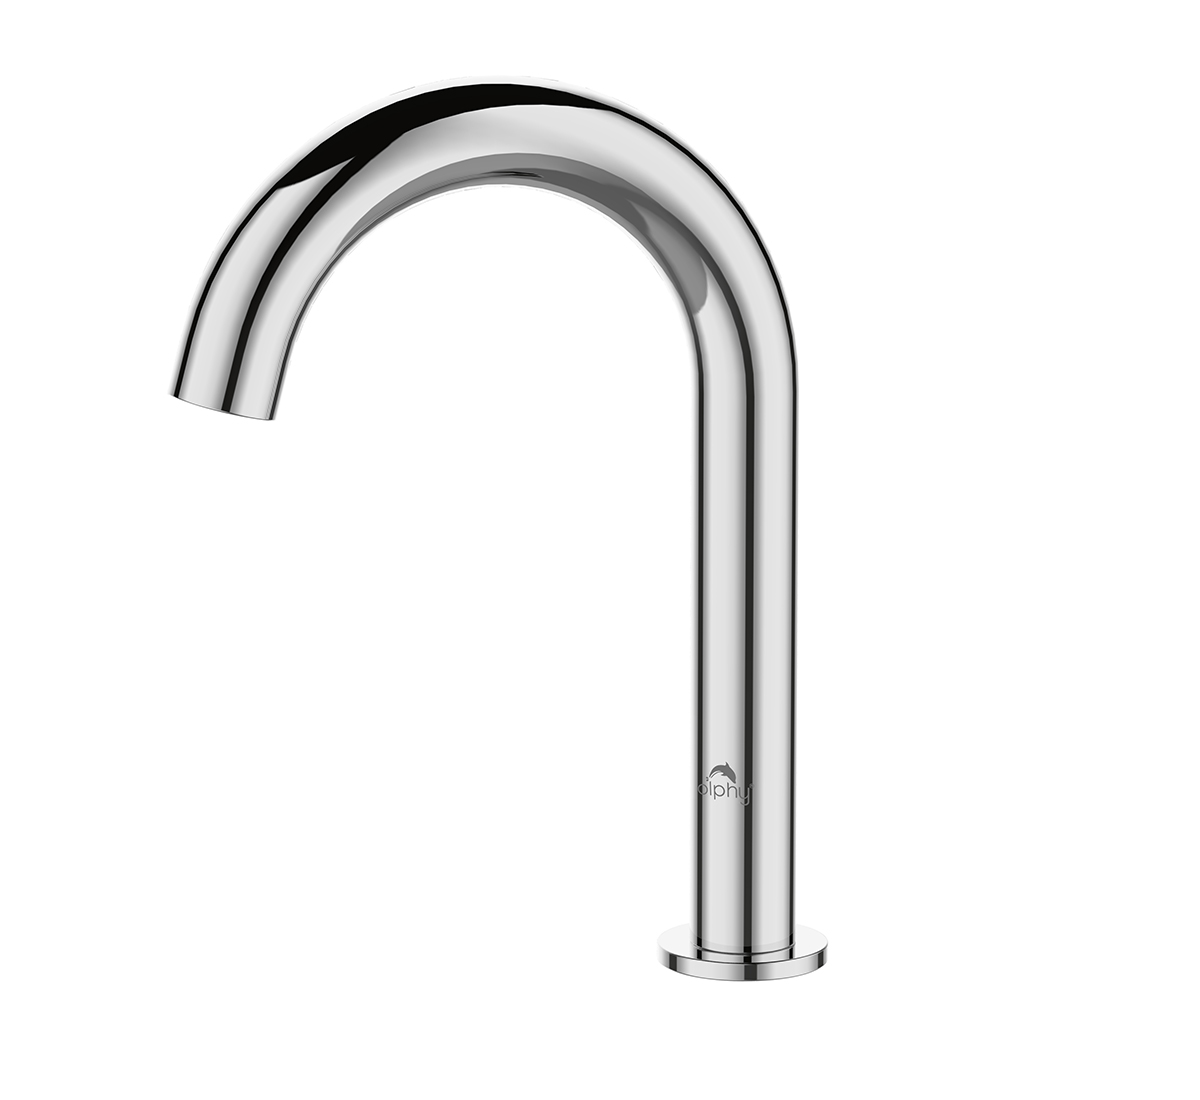 Silver touchless sensor tap with Silent Consumption